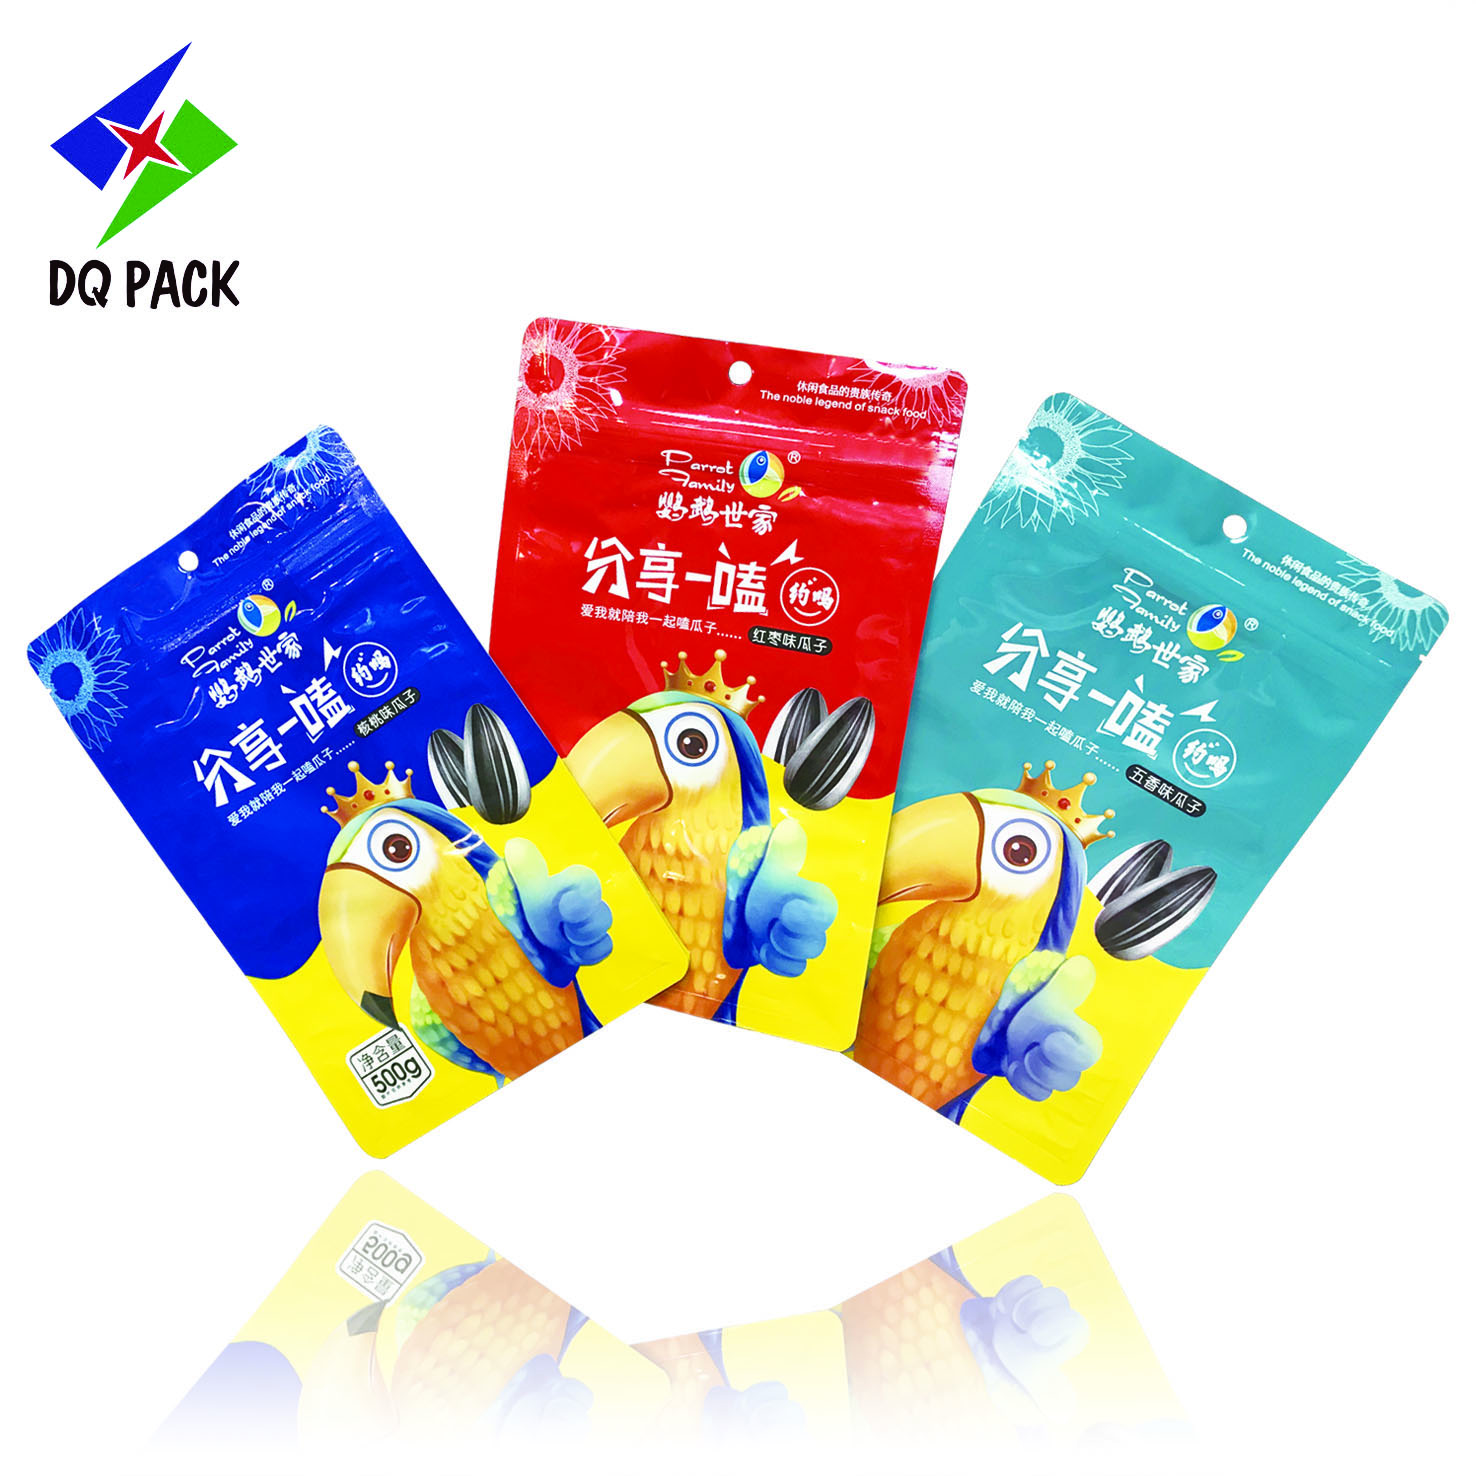 DQ PACK Food Grade 400g Qual Seal Bag 8 Side Seal Pouch Flat Bottom Pouch For Sunflower seeds